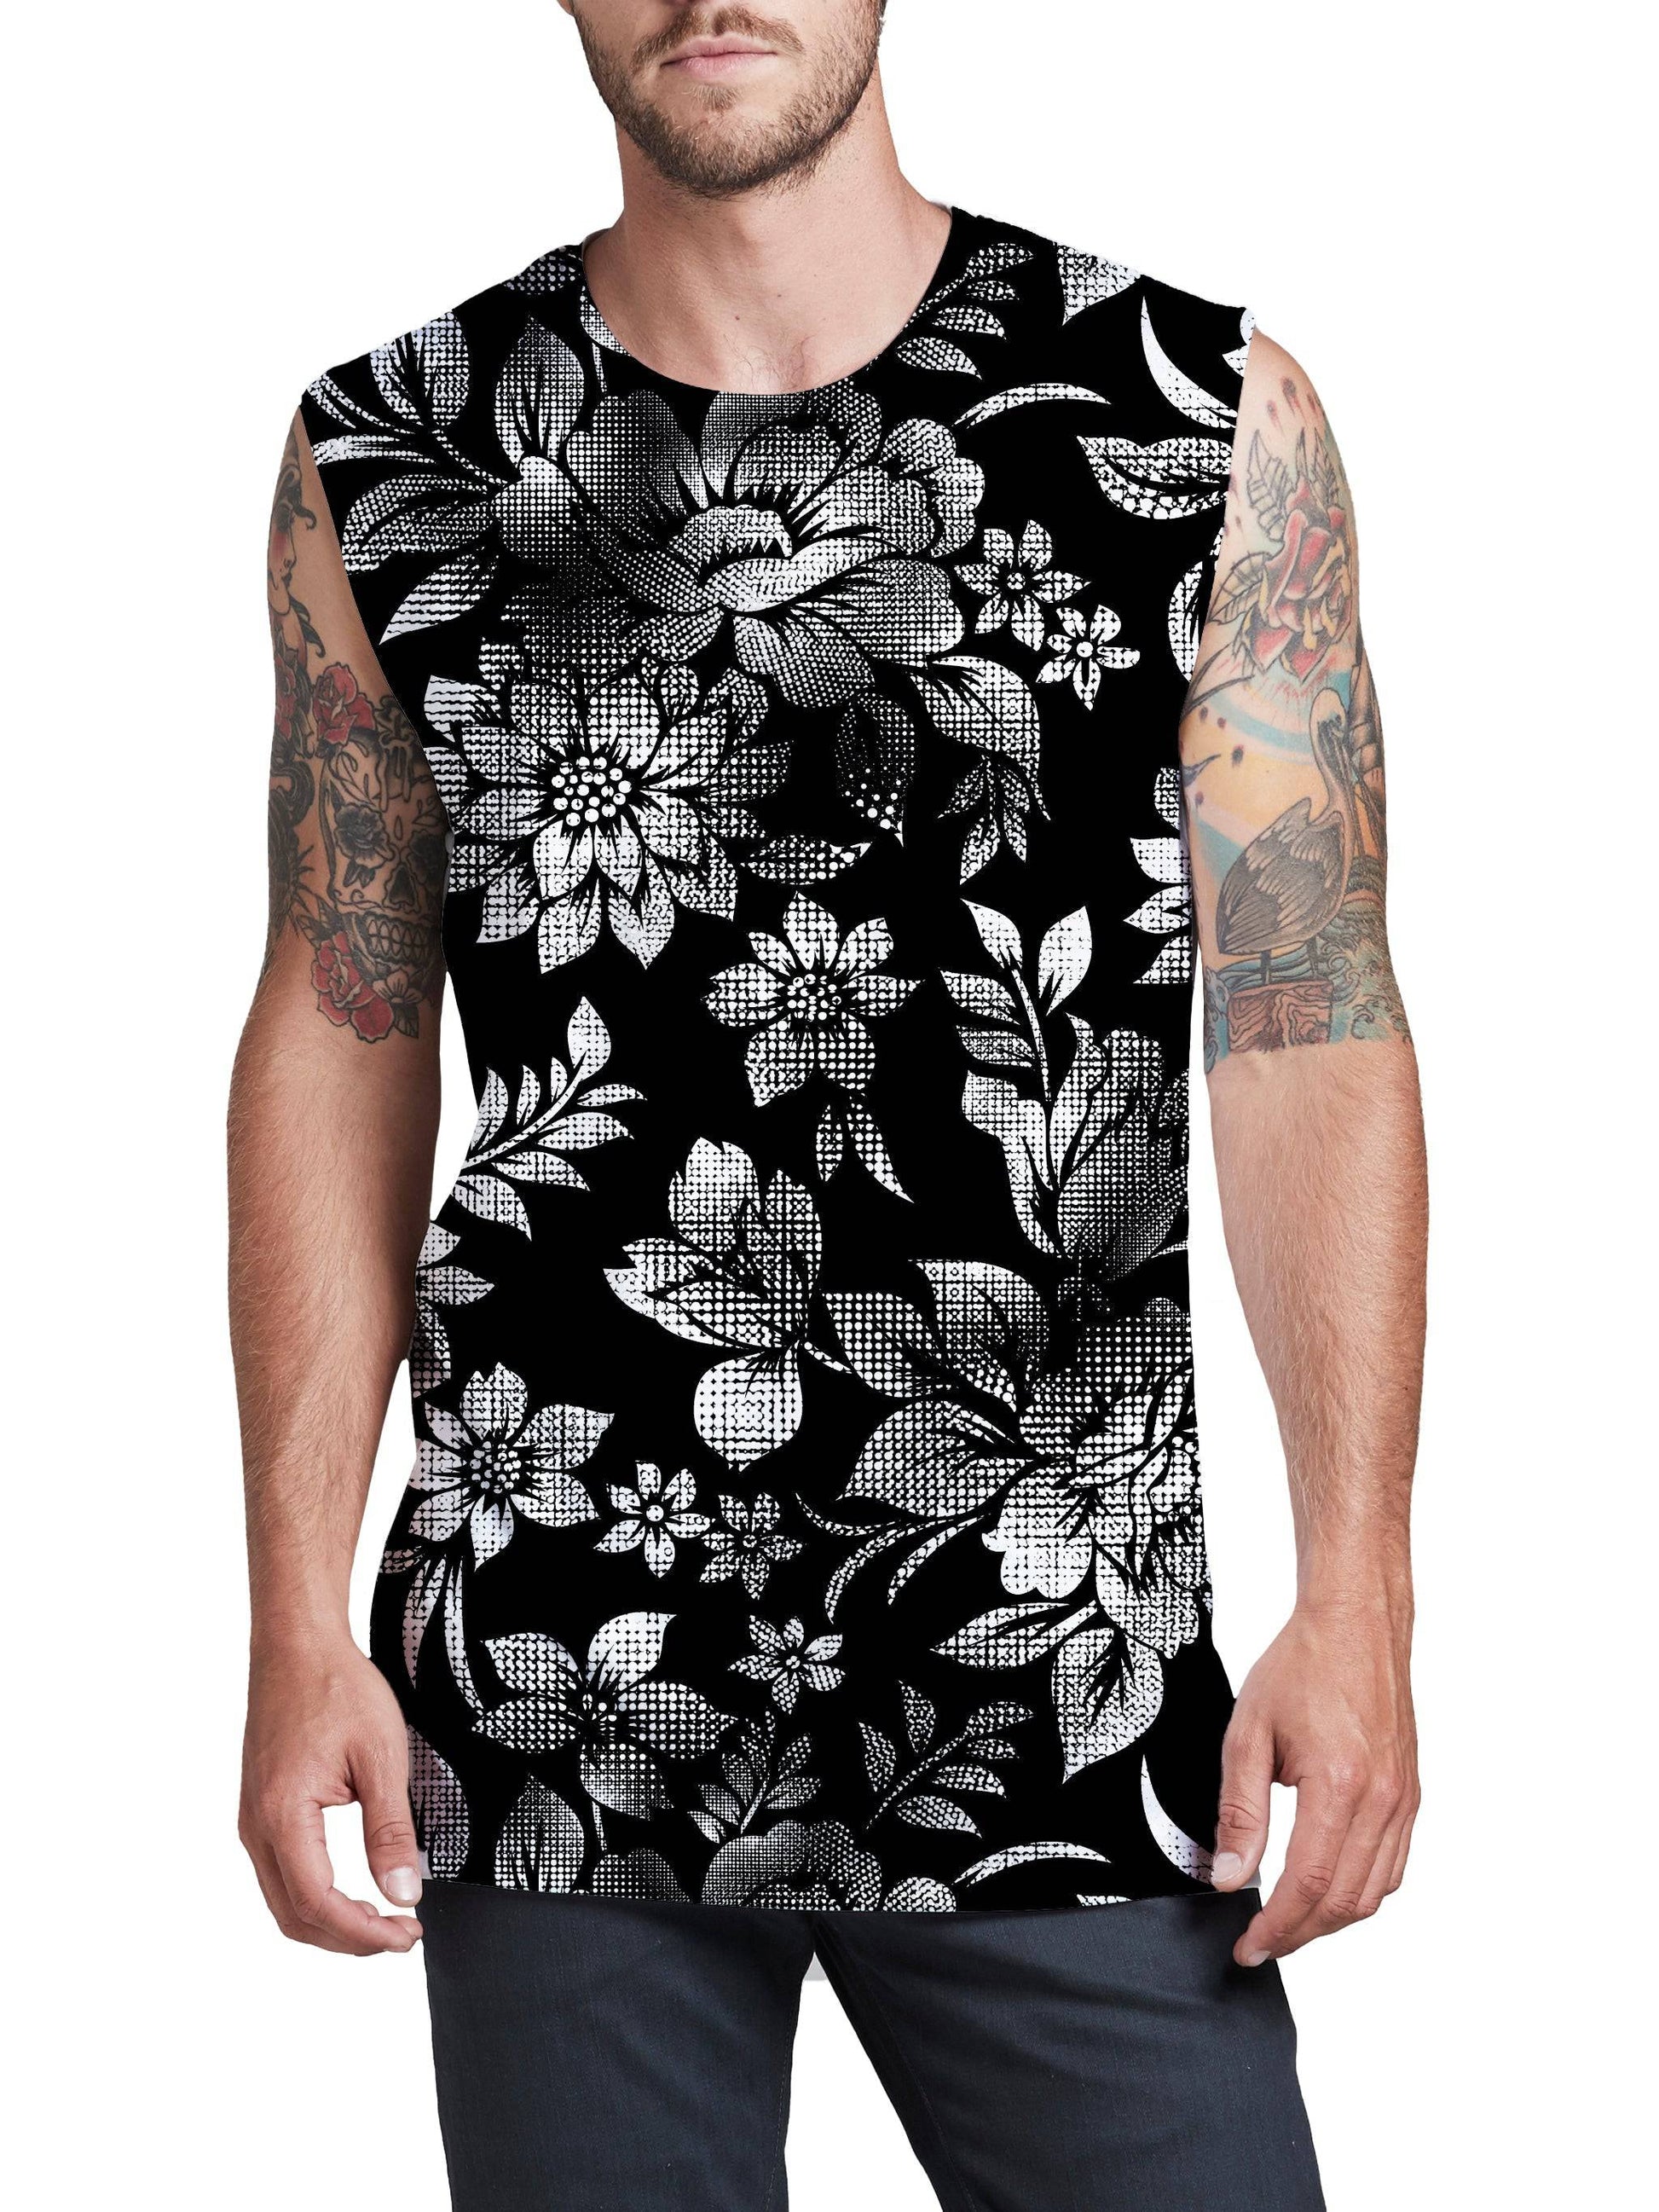 Nature's Candy B&W Men's Muscle Tank, Noctum X Truth, | iEDM